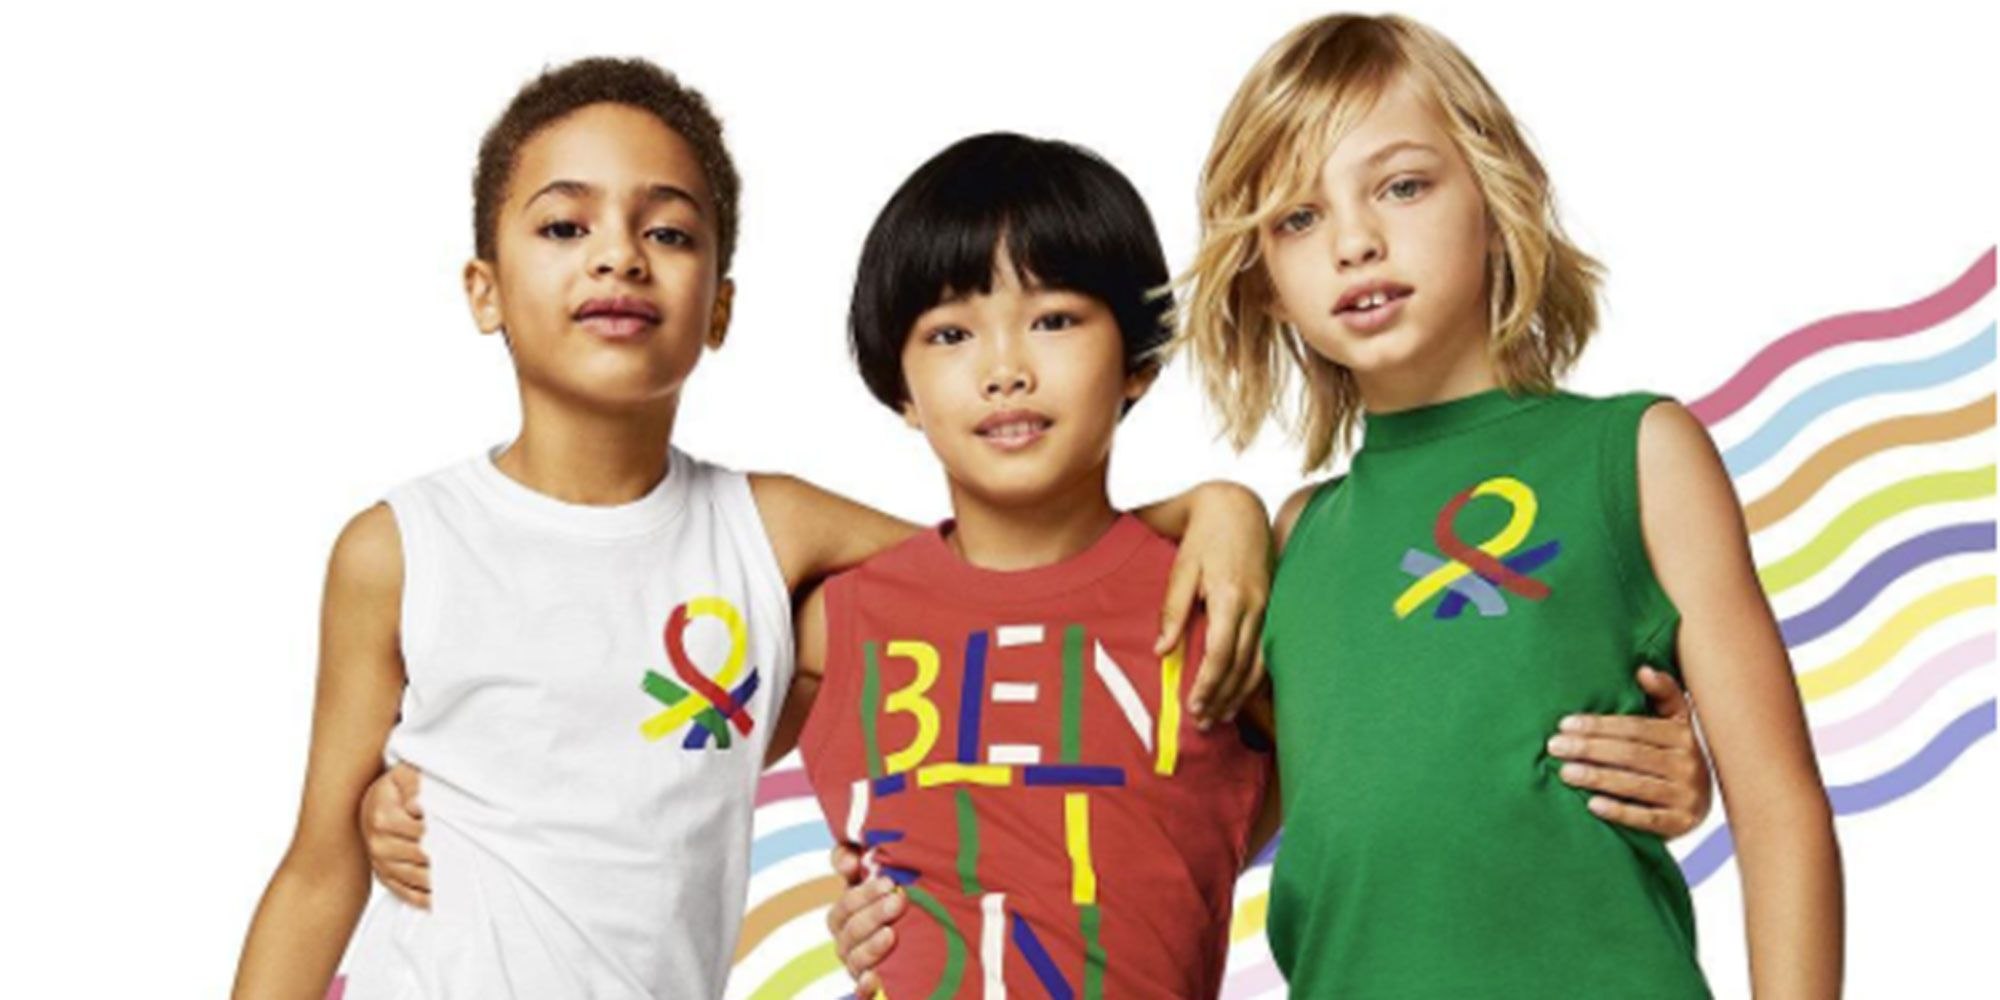 Live united colors. United Colors of Benetton. United Colors of Benetton дети. Бенеттон 2002. Магазин United Colors of Benetton 2022.